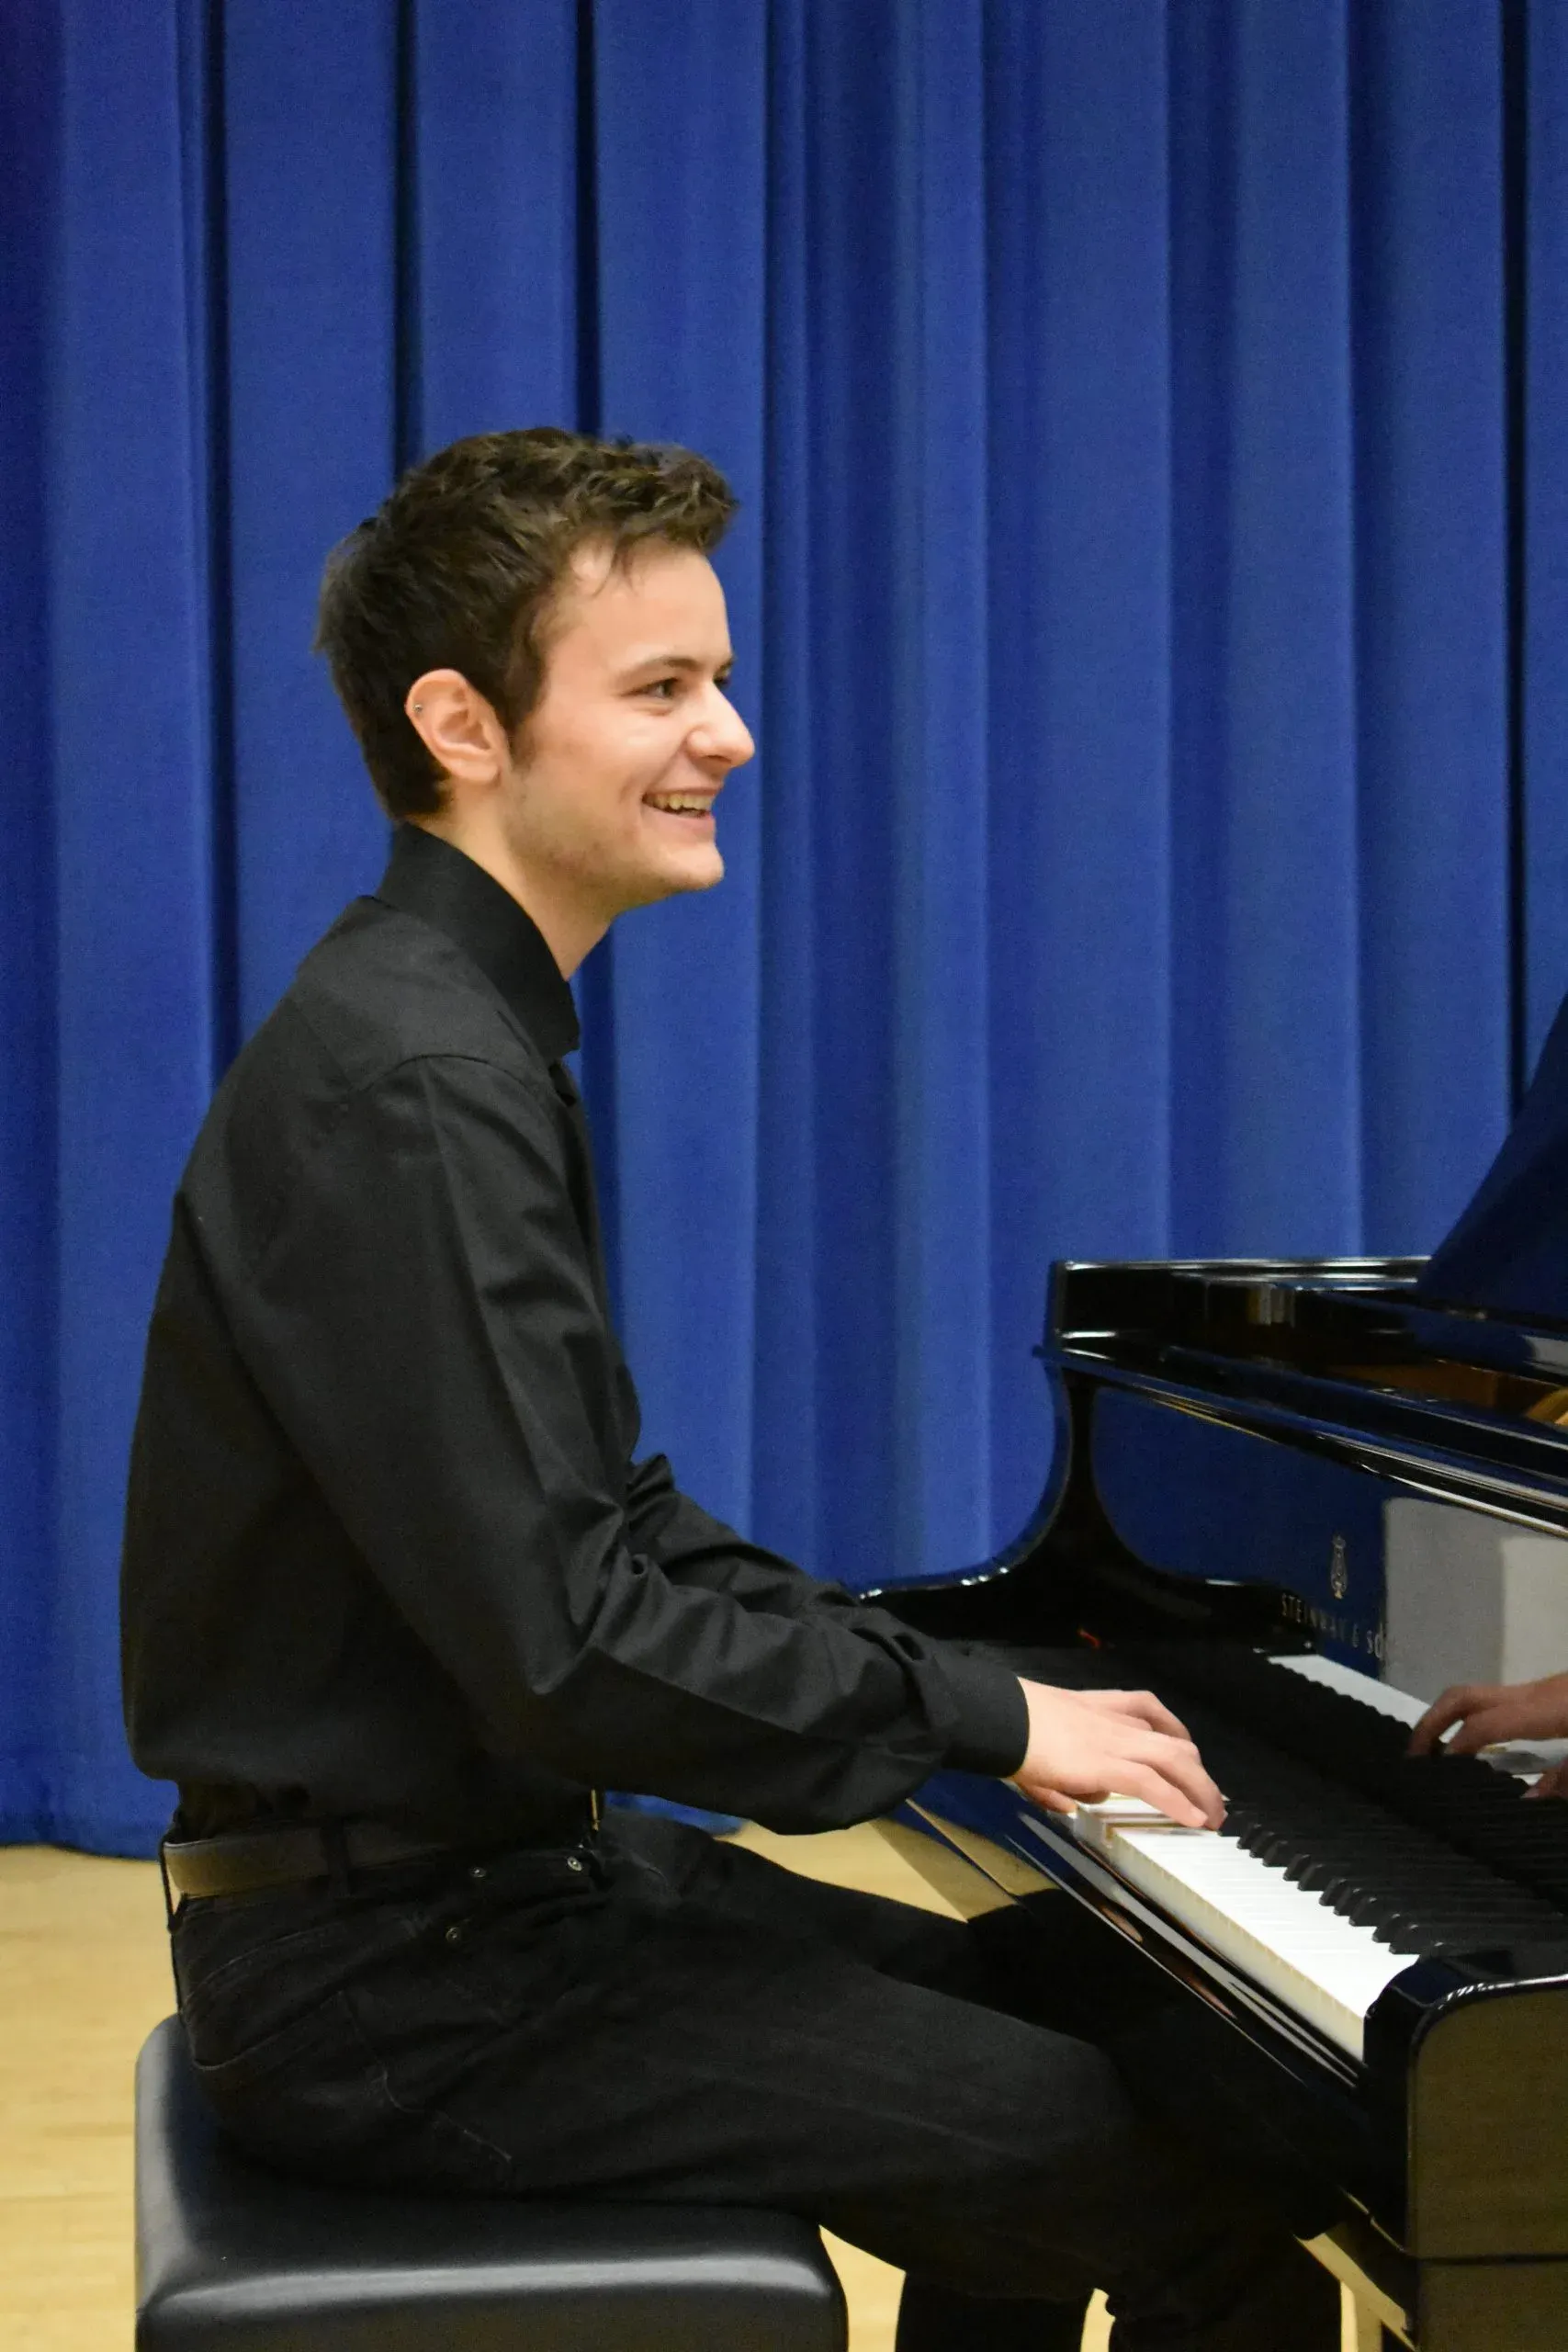 Jacob sitting at a Steinway grand piano, wearing black shirt and trousers, with a blue curtain behind him. He is playing on stage and smiling at someone off camera